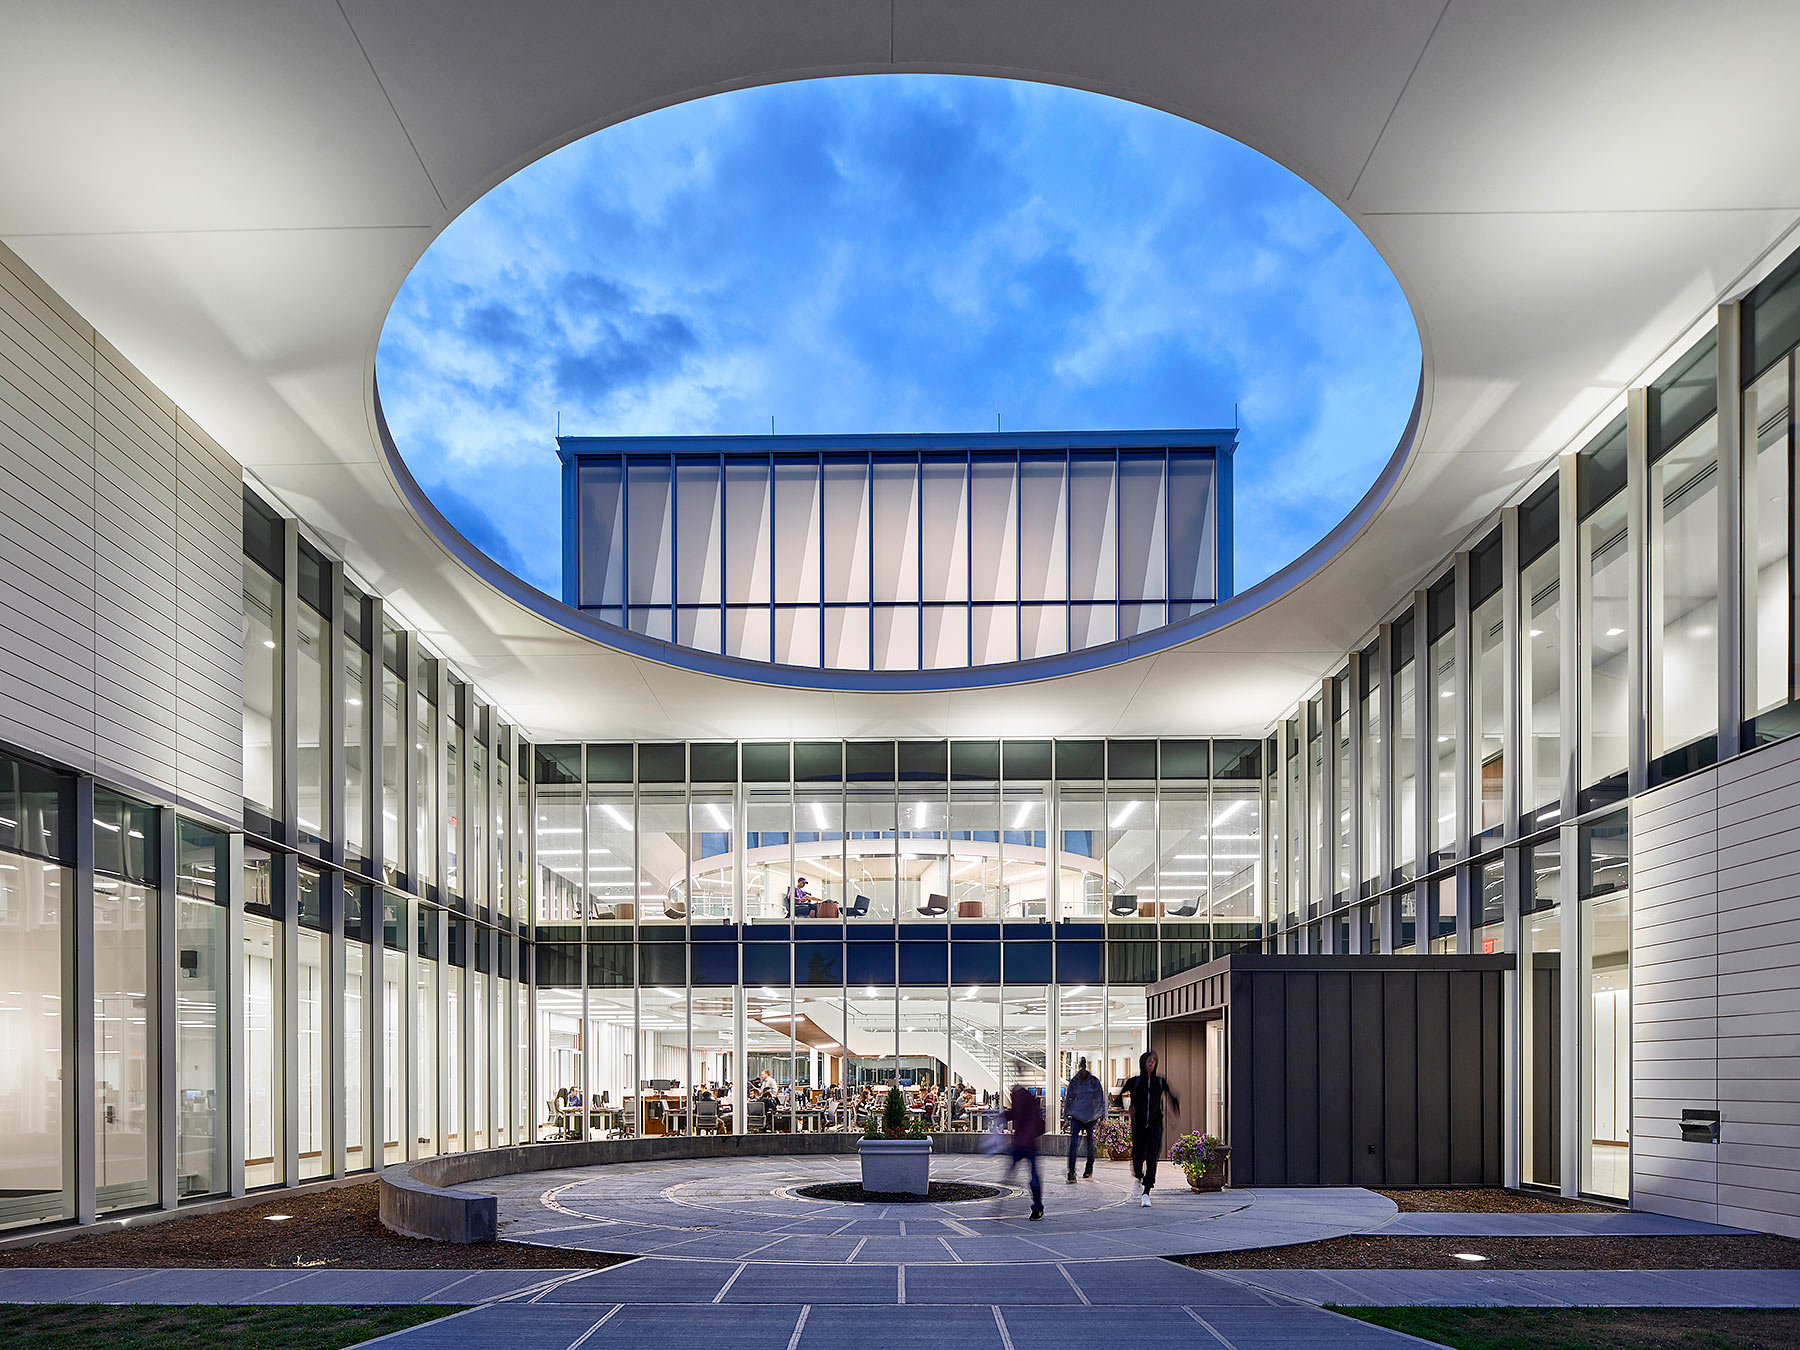  Suffolk County Community College Brentwood, NY ikon 5 Architects 